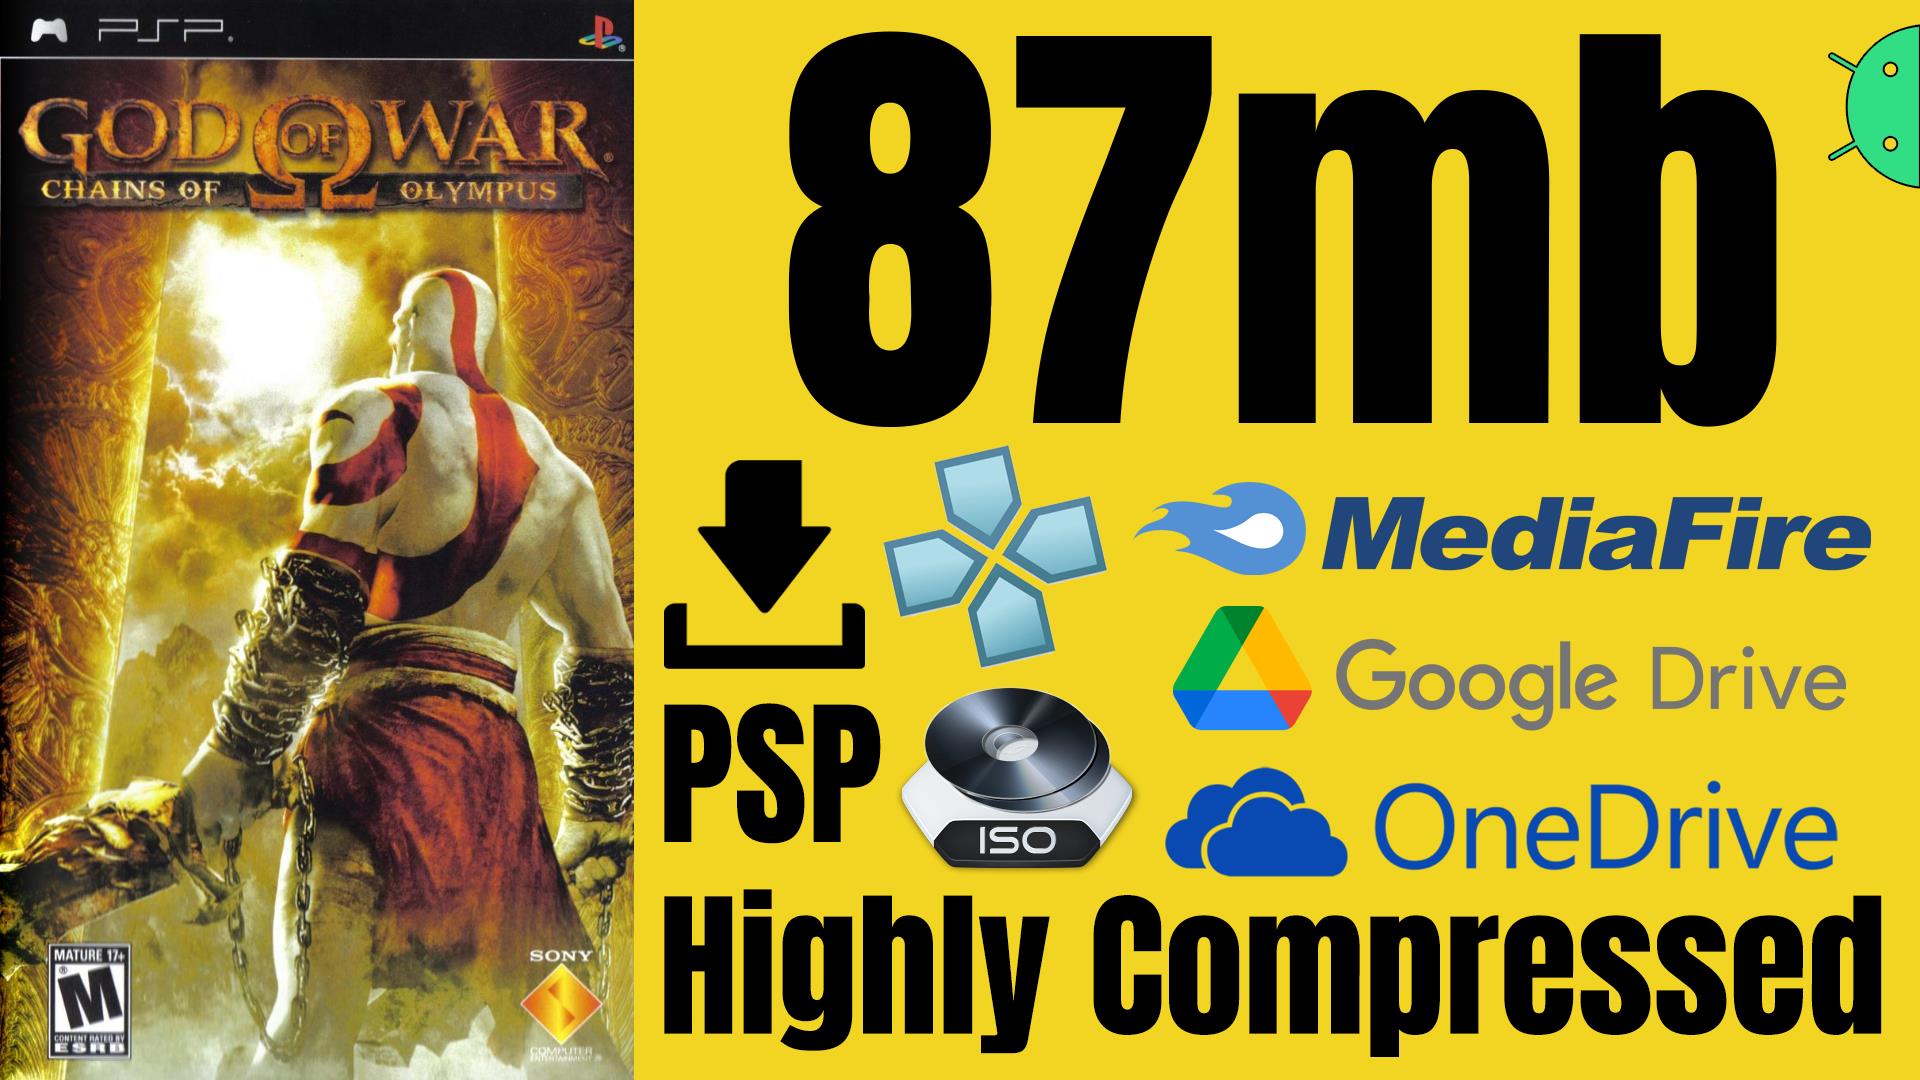 God of War Chains of Olympus PSP ISO Highly Compressed Game Download